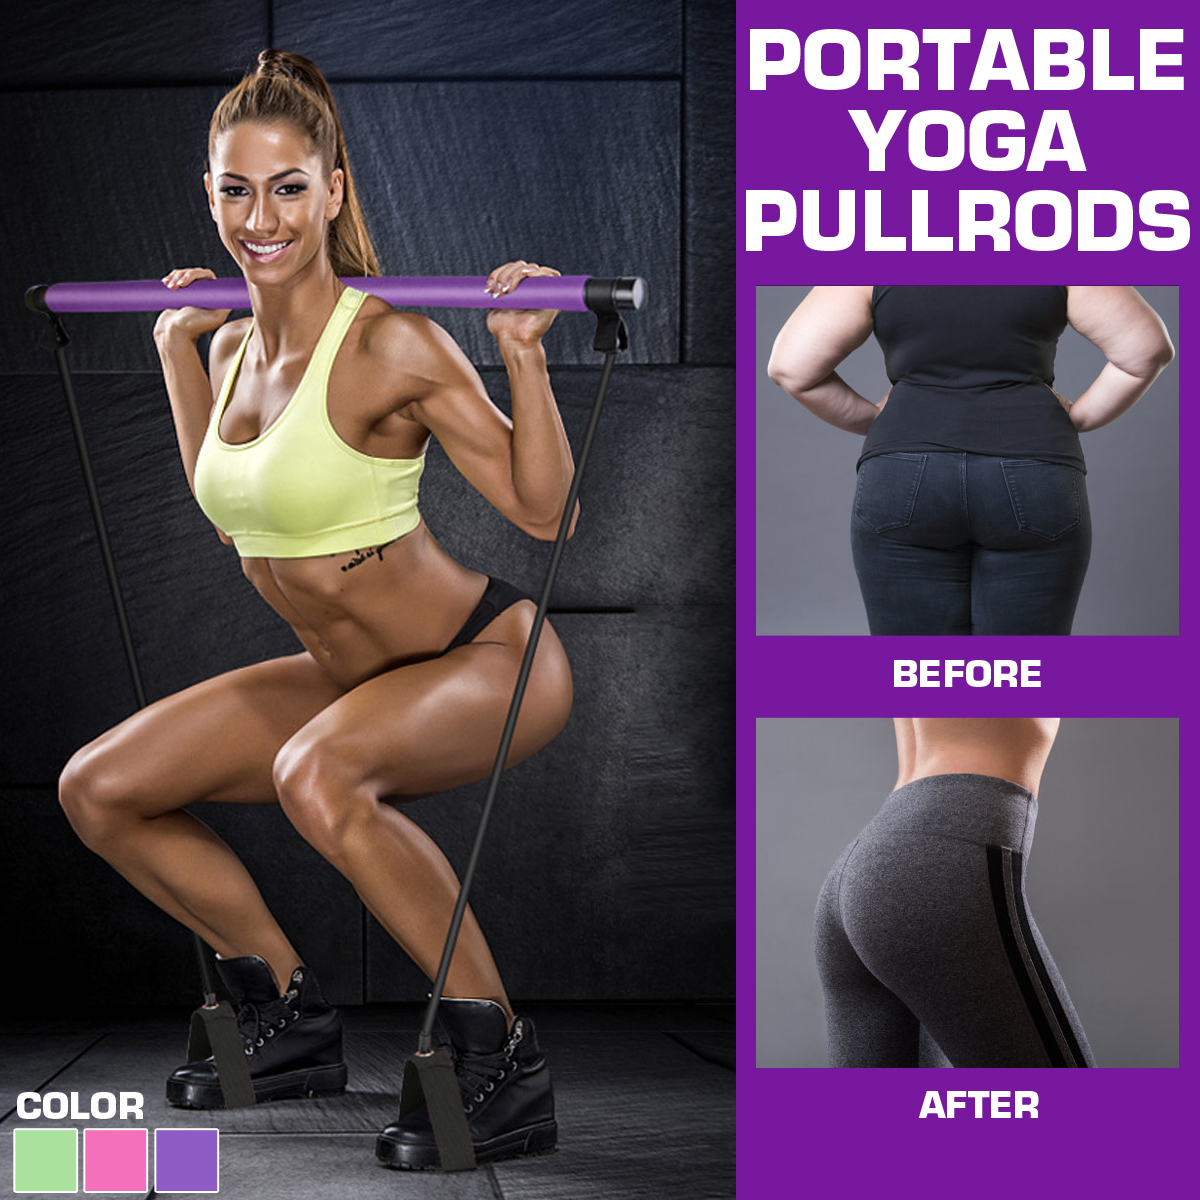 Multi-functional-Yoga-Pull-Rods-Portable-Gym-Pilates-Bar-with-Resistance-Band-for-Chest-expanding-Fi-1688989-2